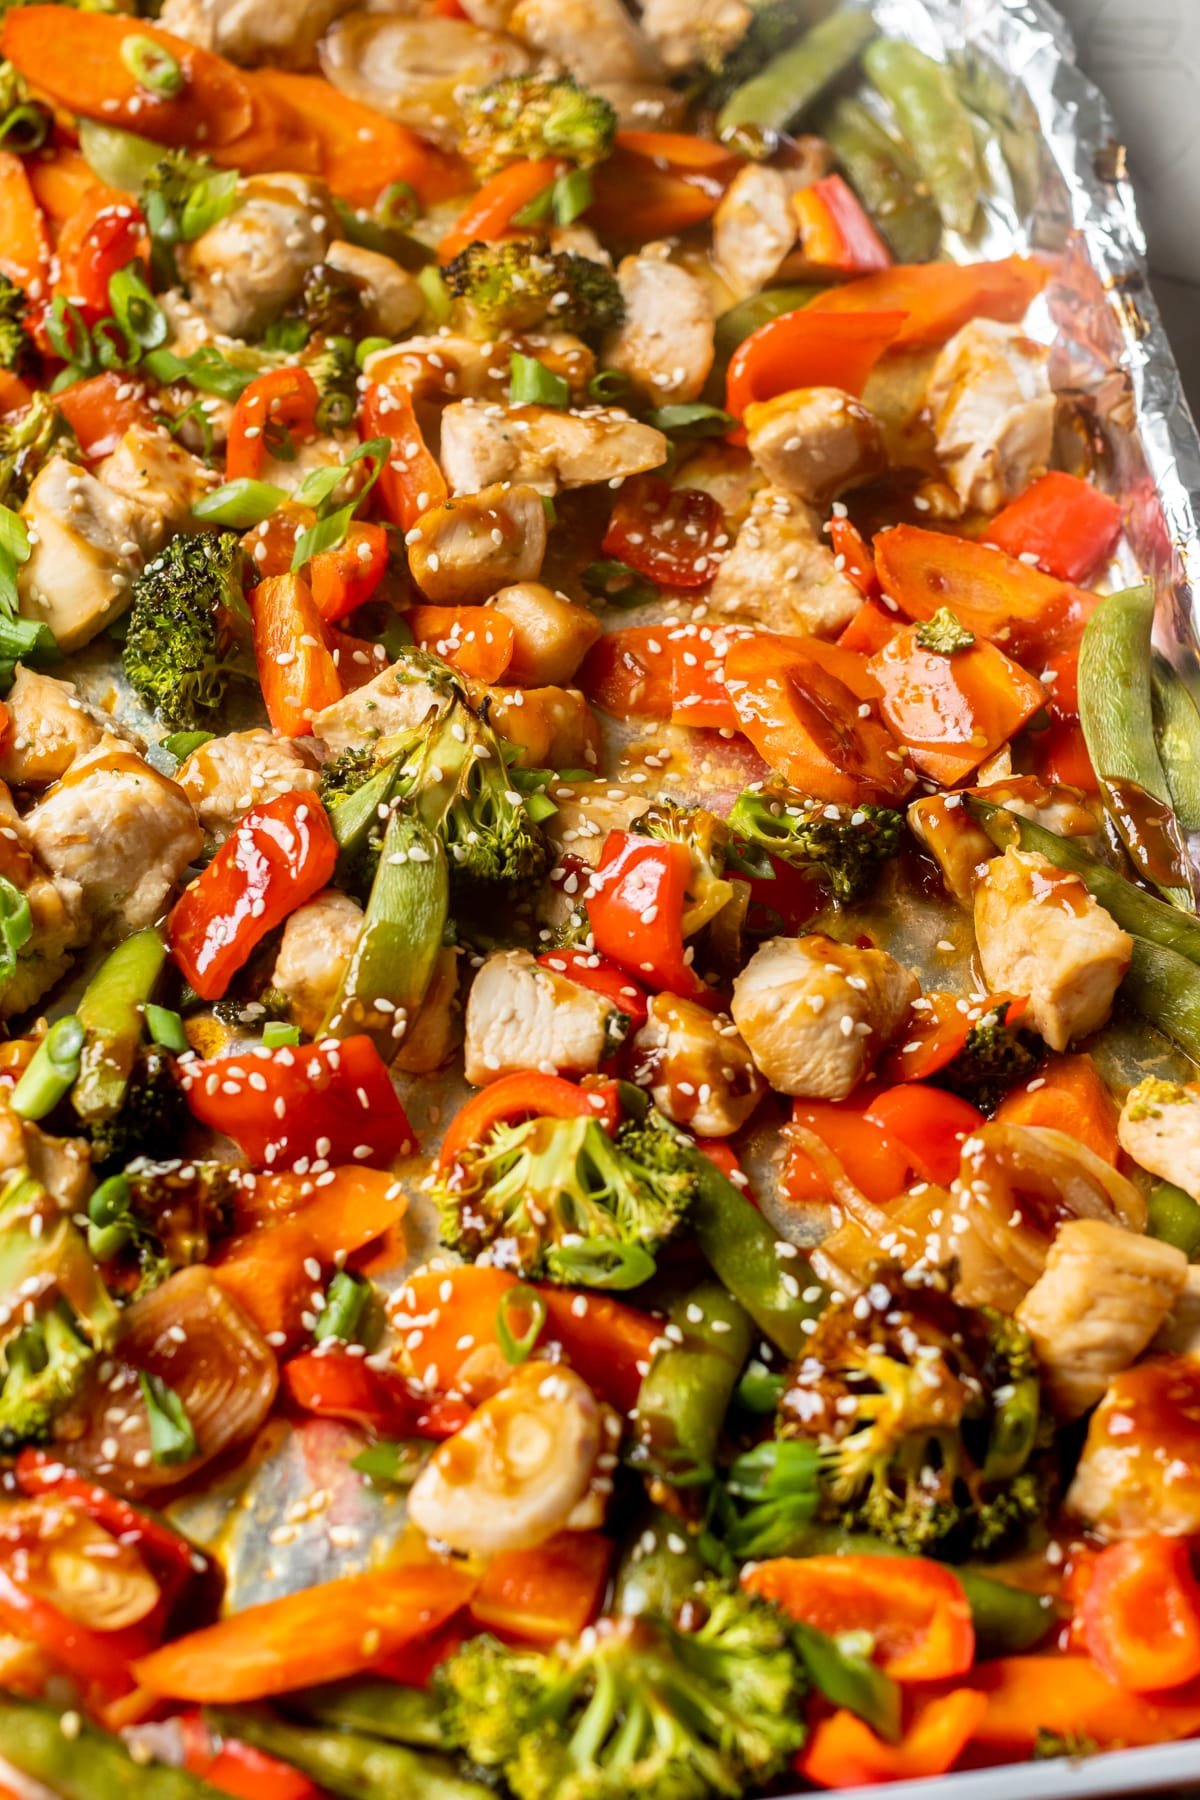 sheet pan covered in foil with cooked chicken cubes and roasted veggies drizzled in sauce and topped with sesame seeds